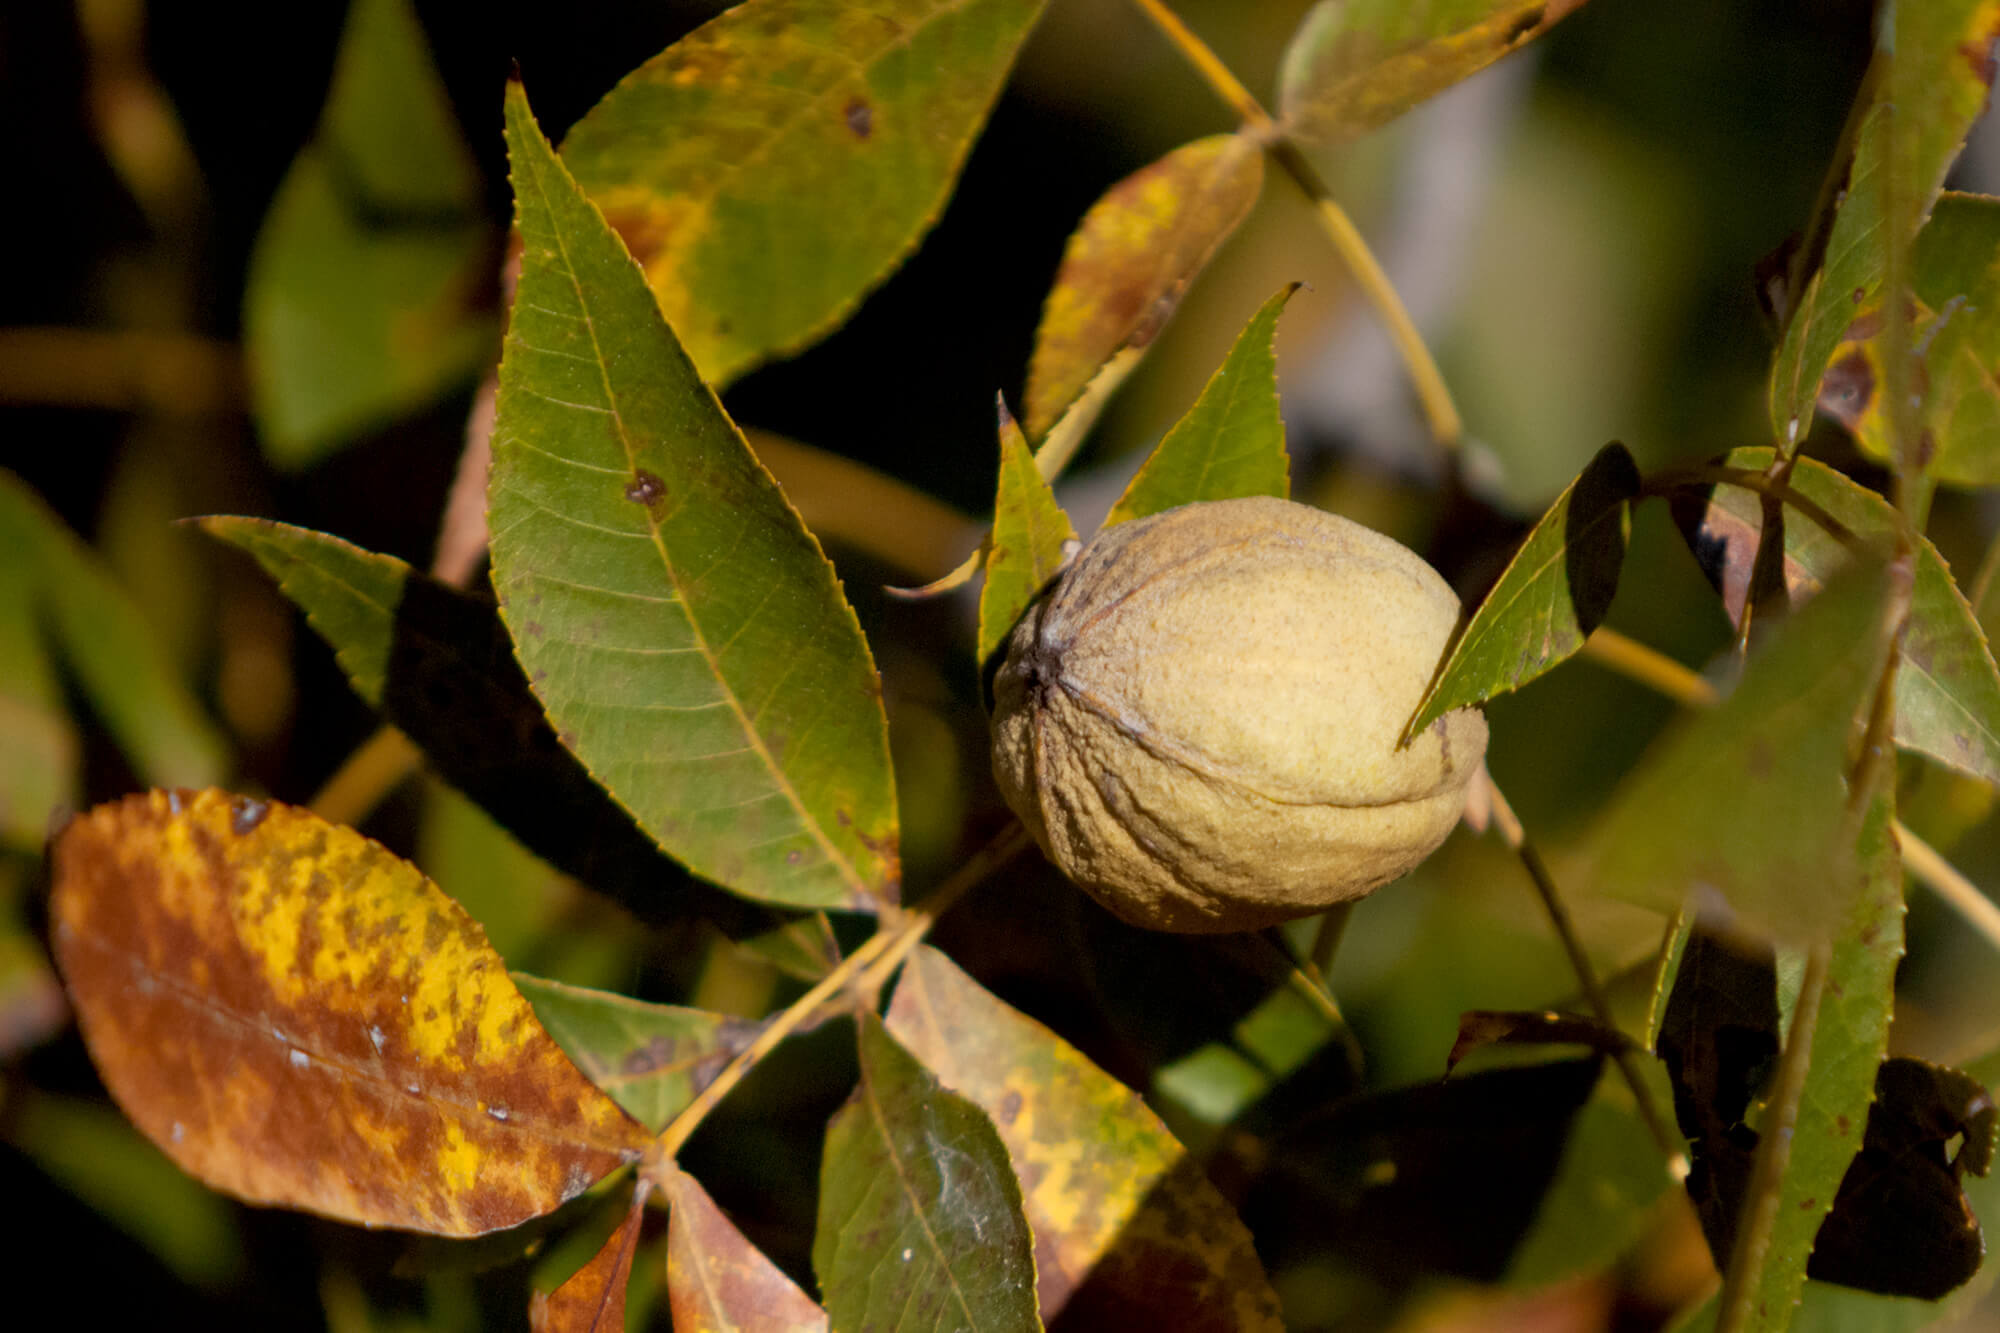 National Research Project Receives Historic Funding to Advance DNA Fingerprint System in Pecans